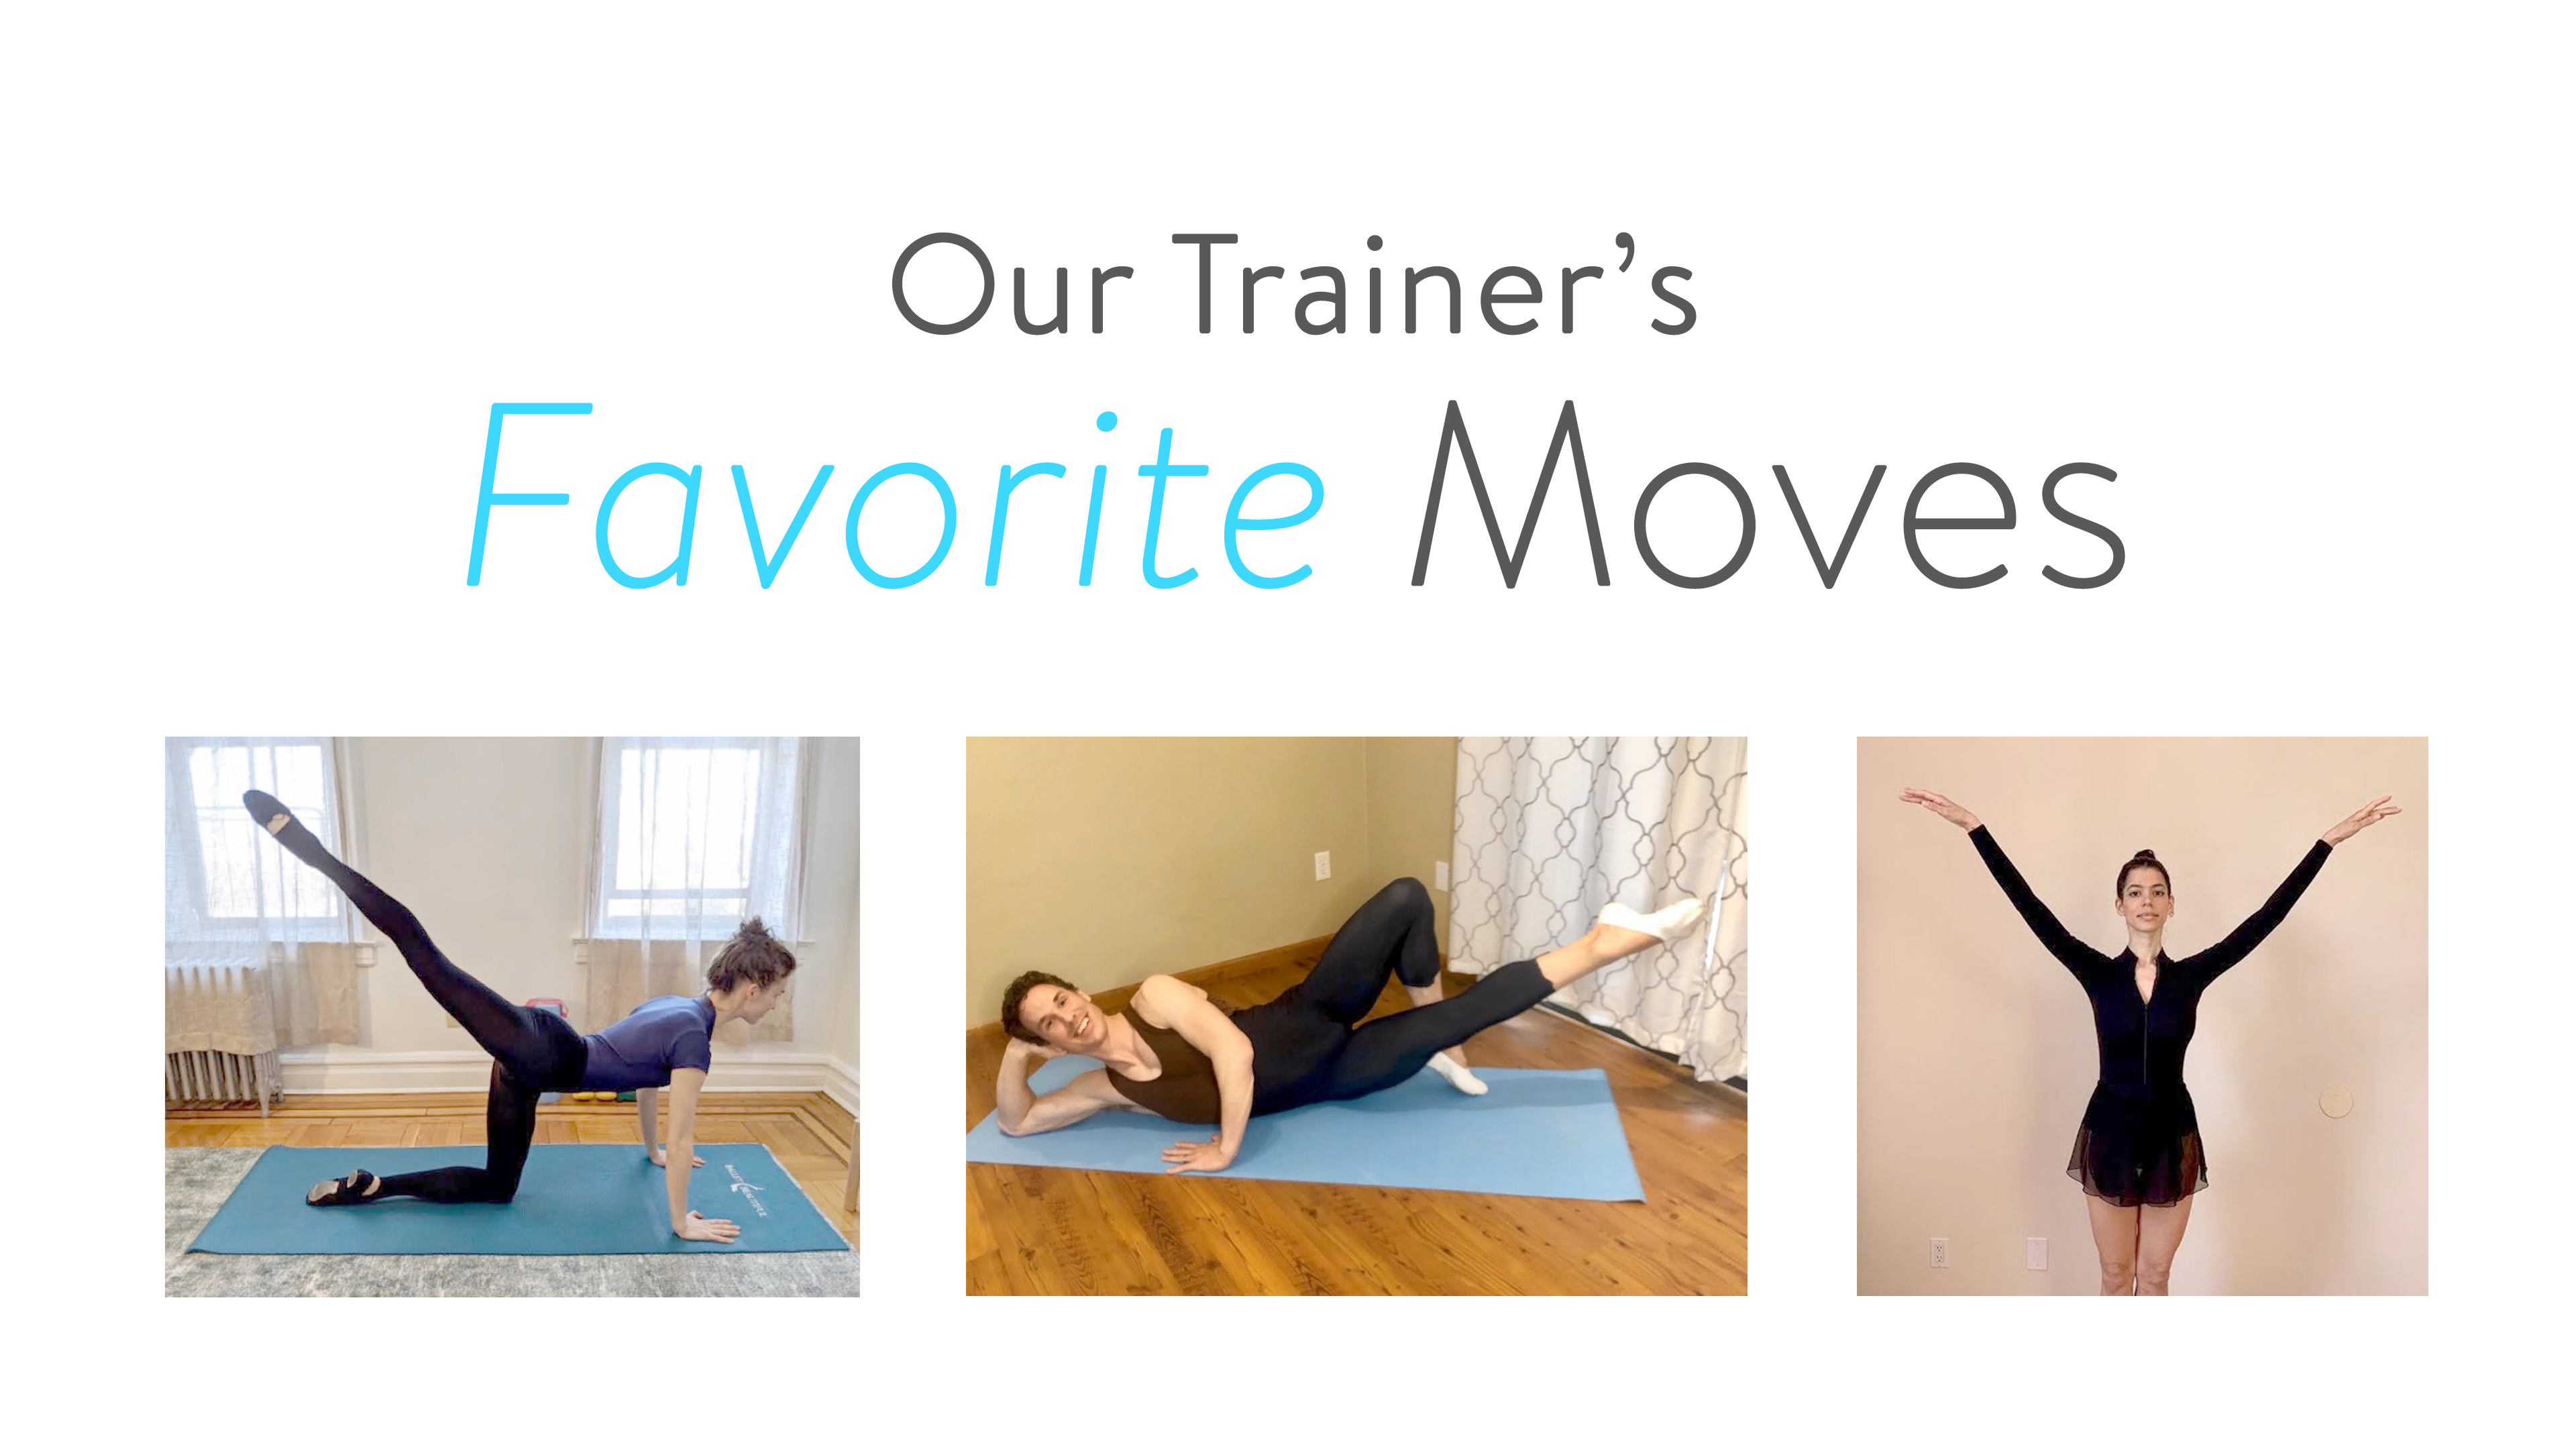 Our Trainer's Favorite Moves